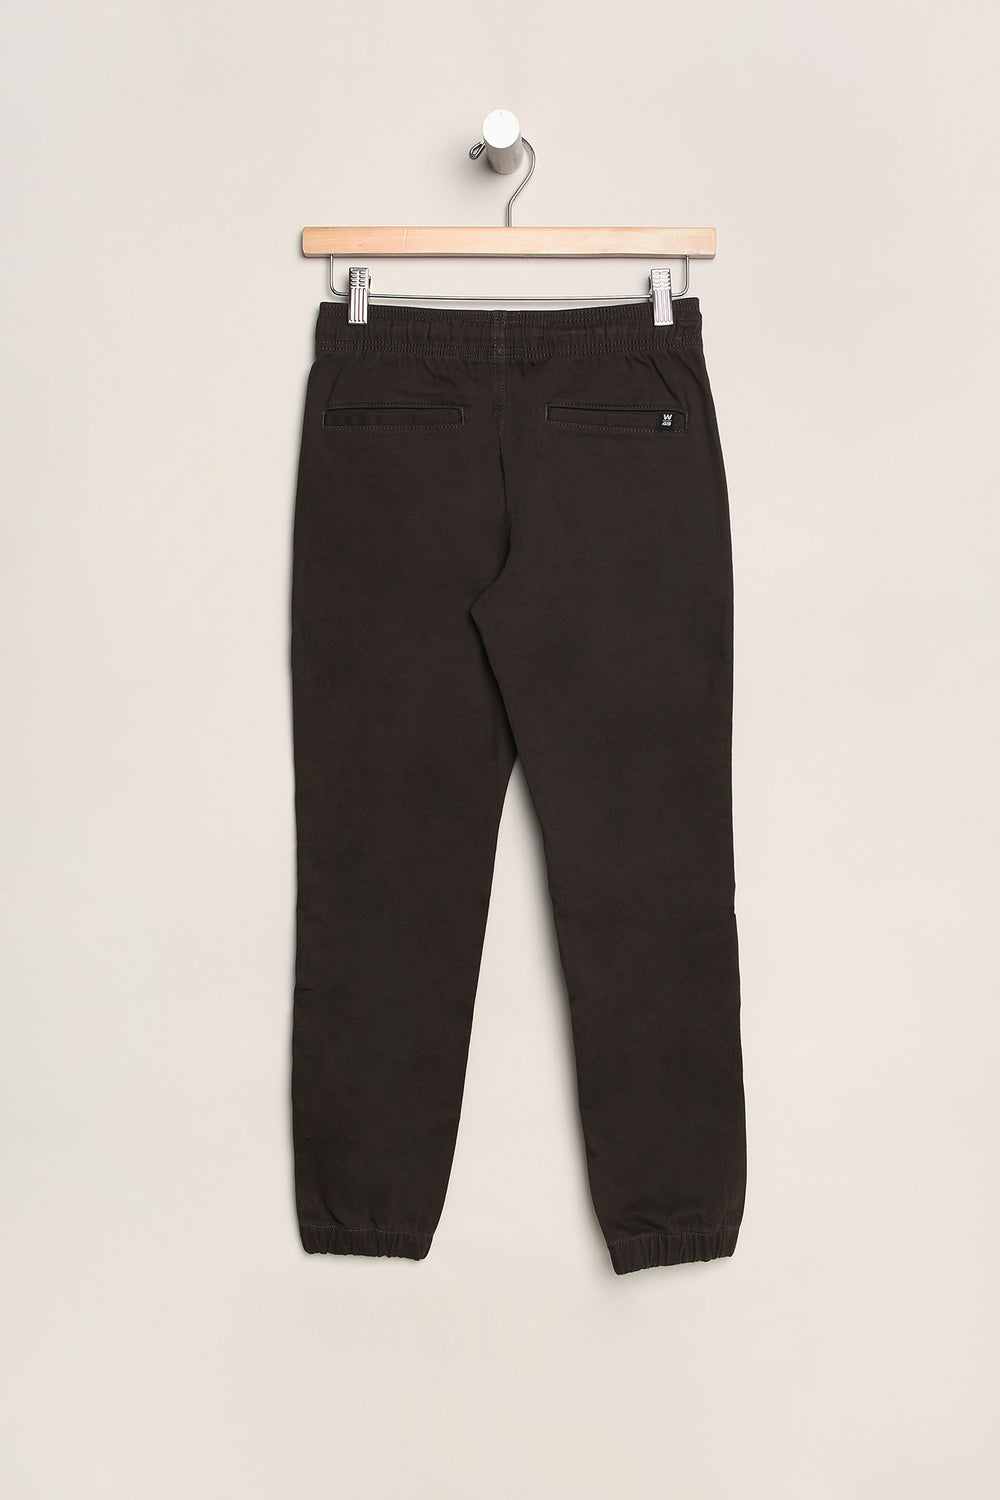 West49 Youth Slim Twill Jogger Brown